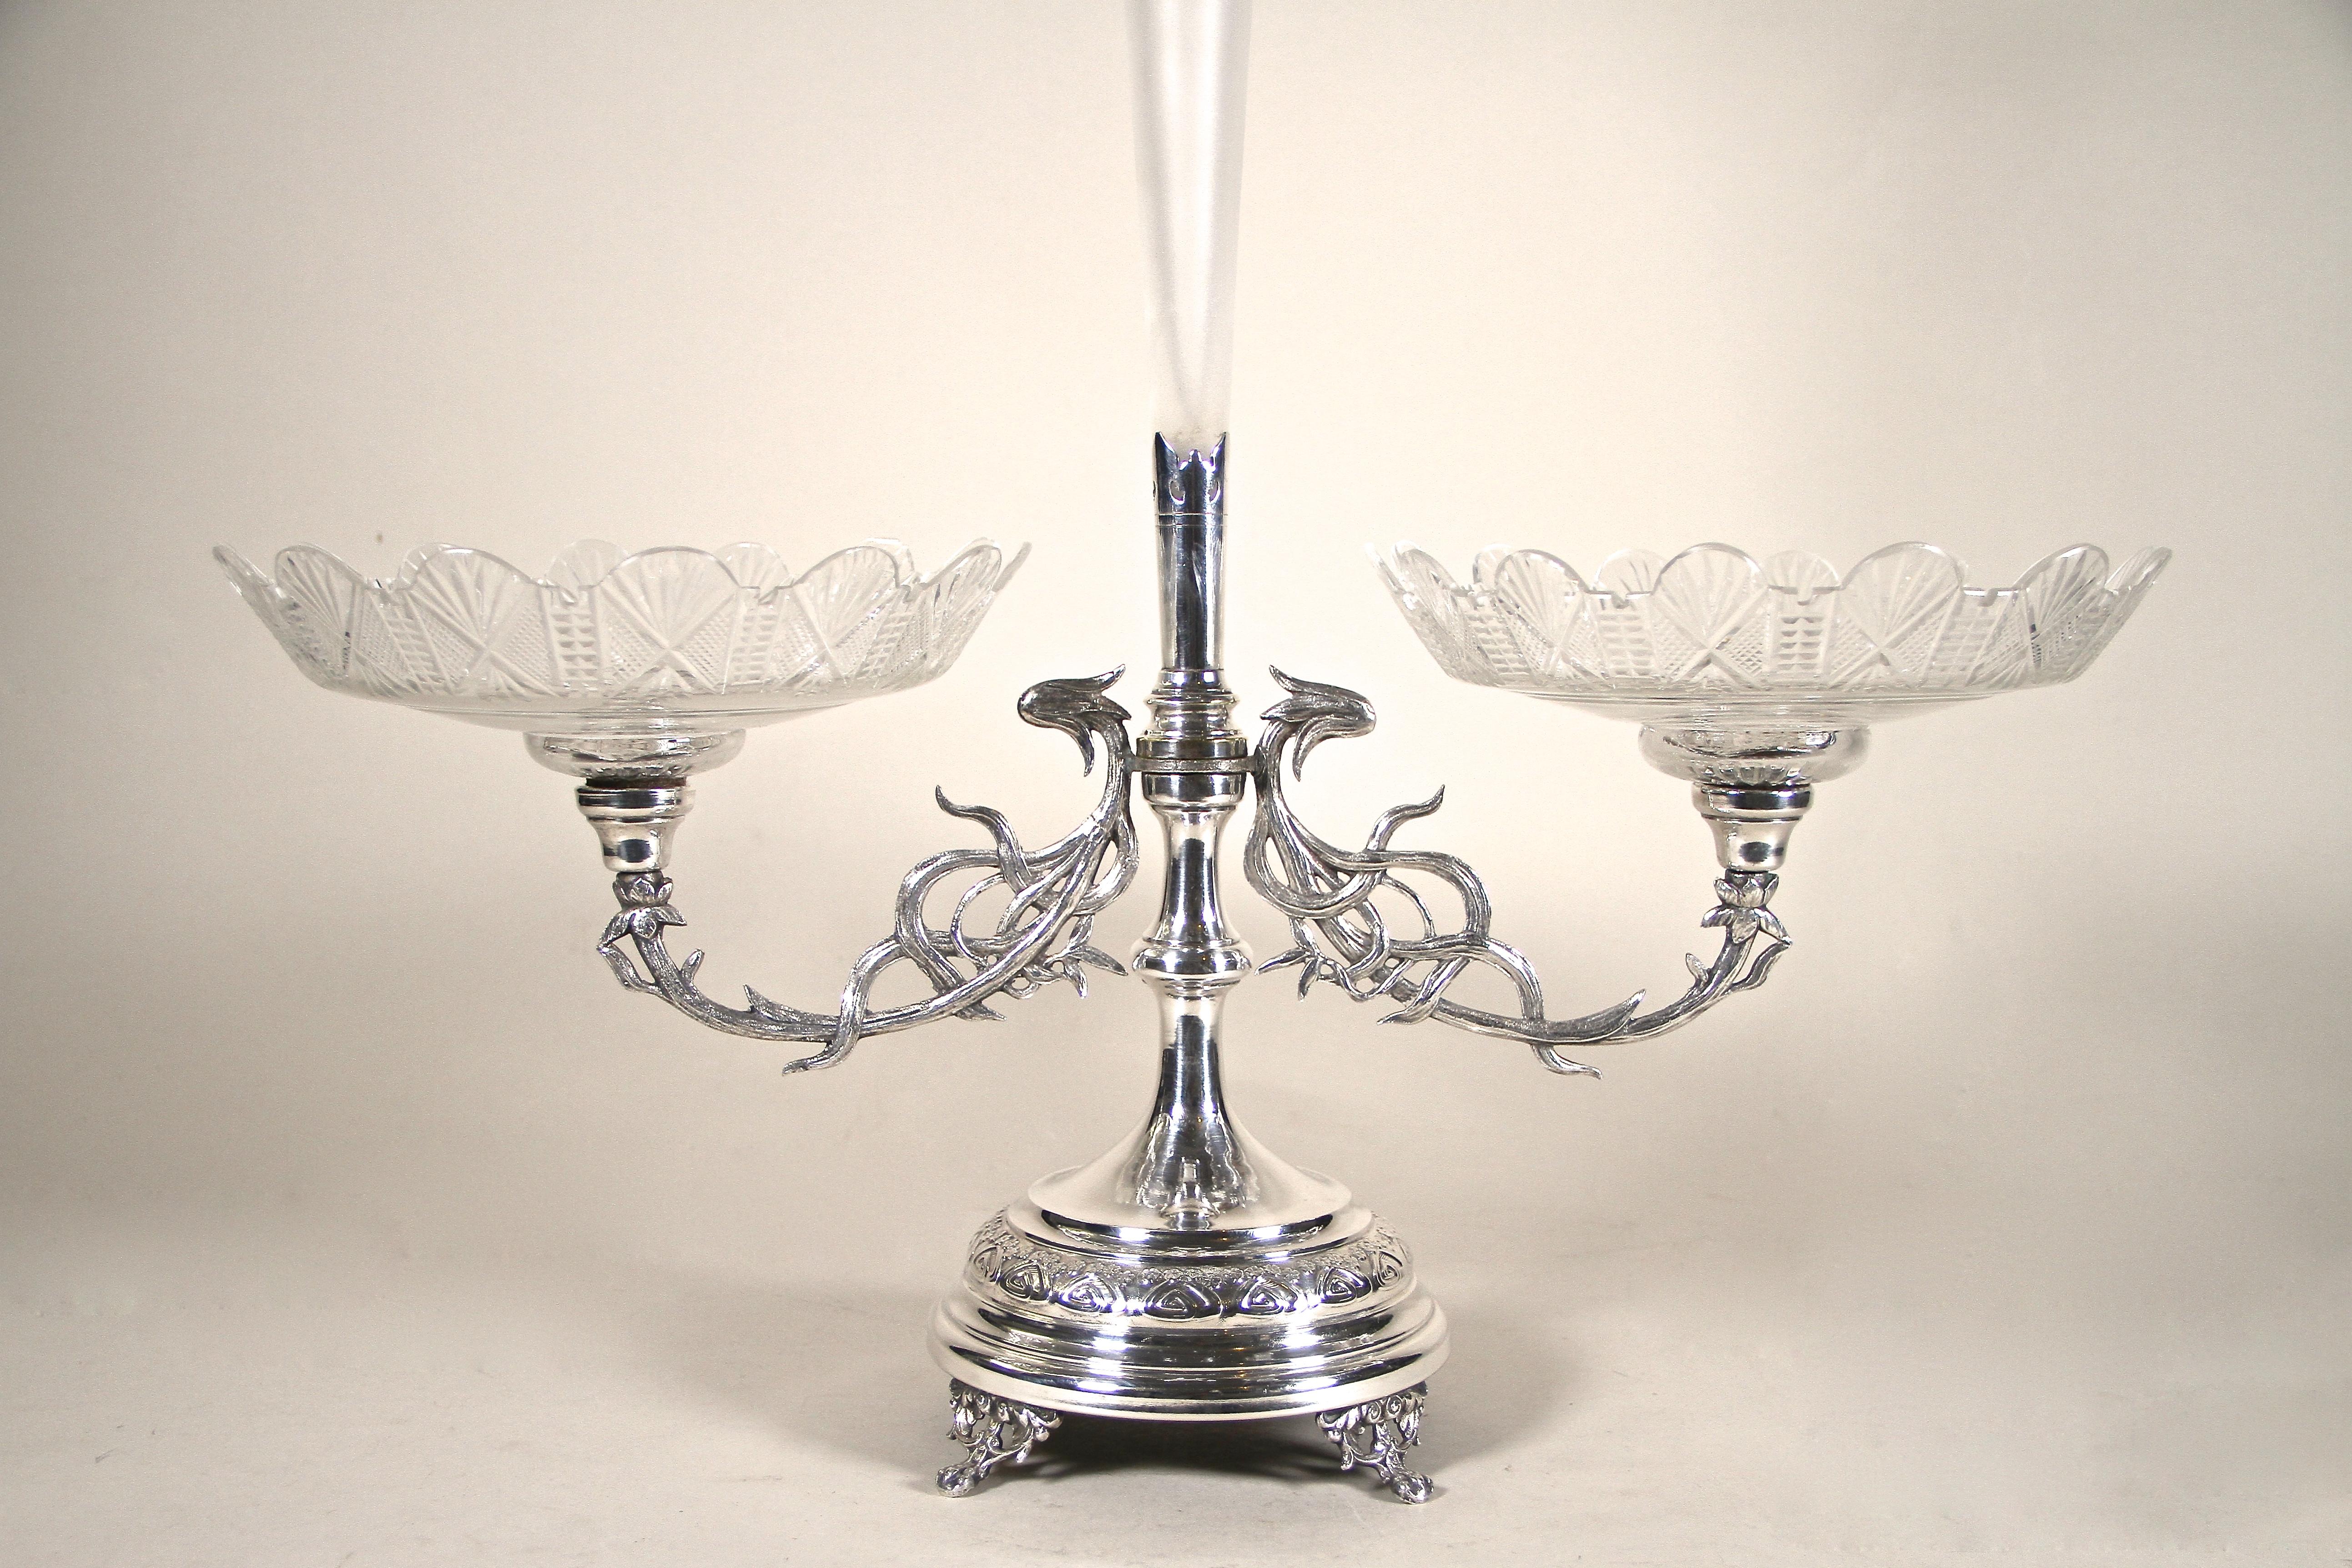 A true masterpiece is this large silvered Centerpiece with engraved glass bowls from the early Art Nouveau period in Austria. Artfully processed around 1900, this exceptionally designed centerpiece impresses with its lovely base, beautiful organic